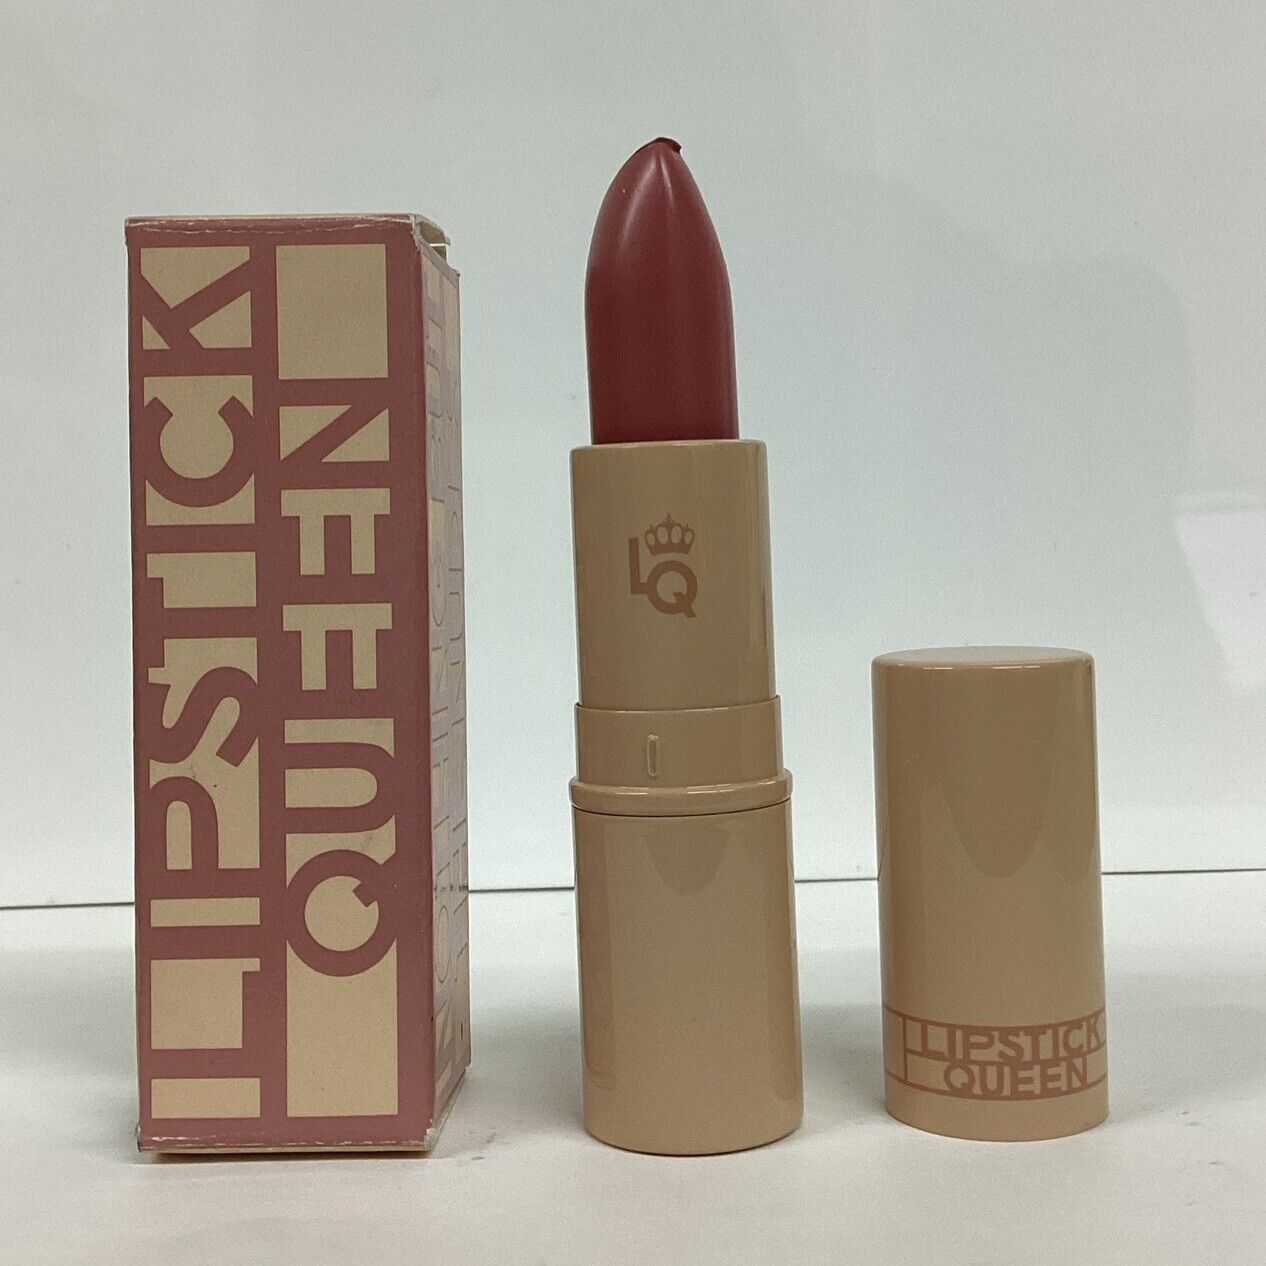 Lipstick Queen THE TRUTH 0.12oz As Pictured 